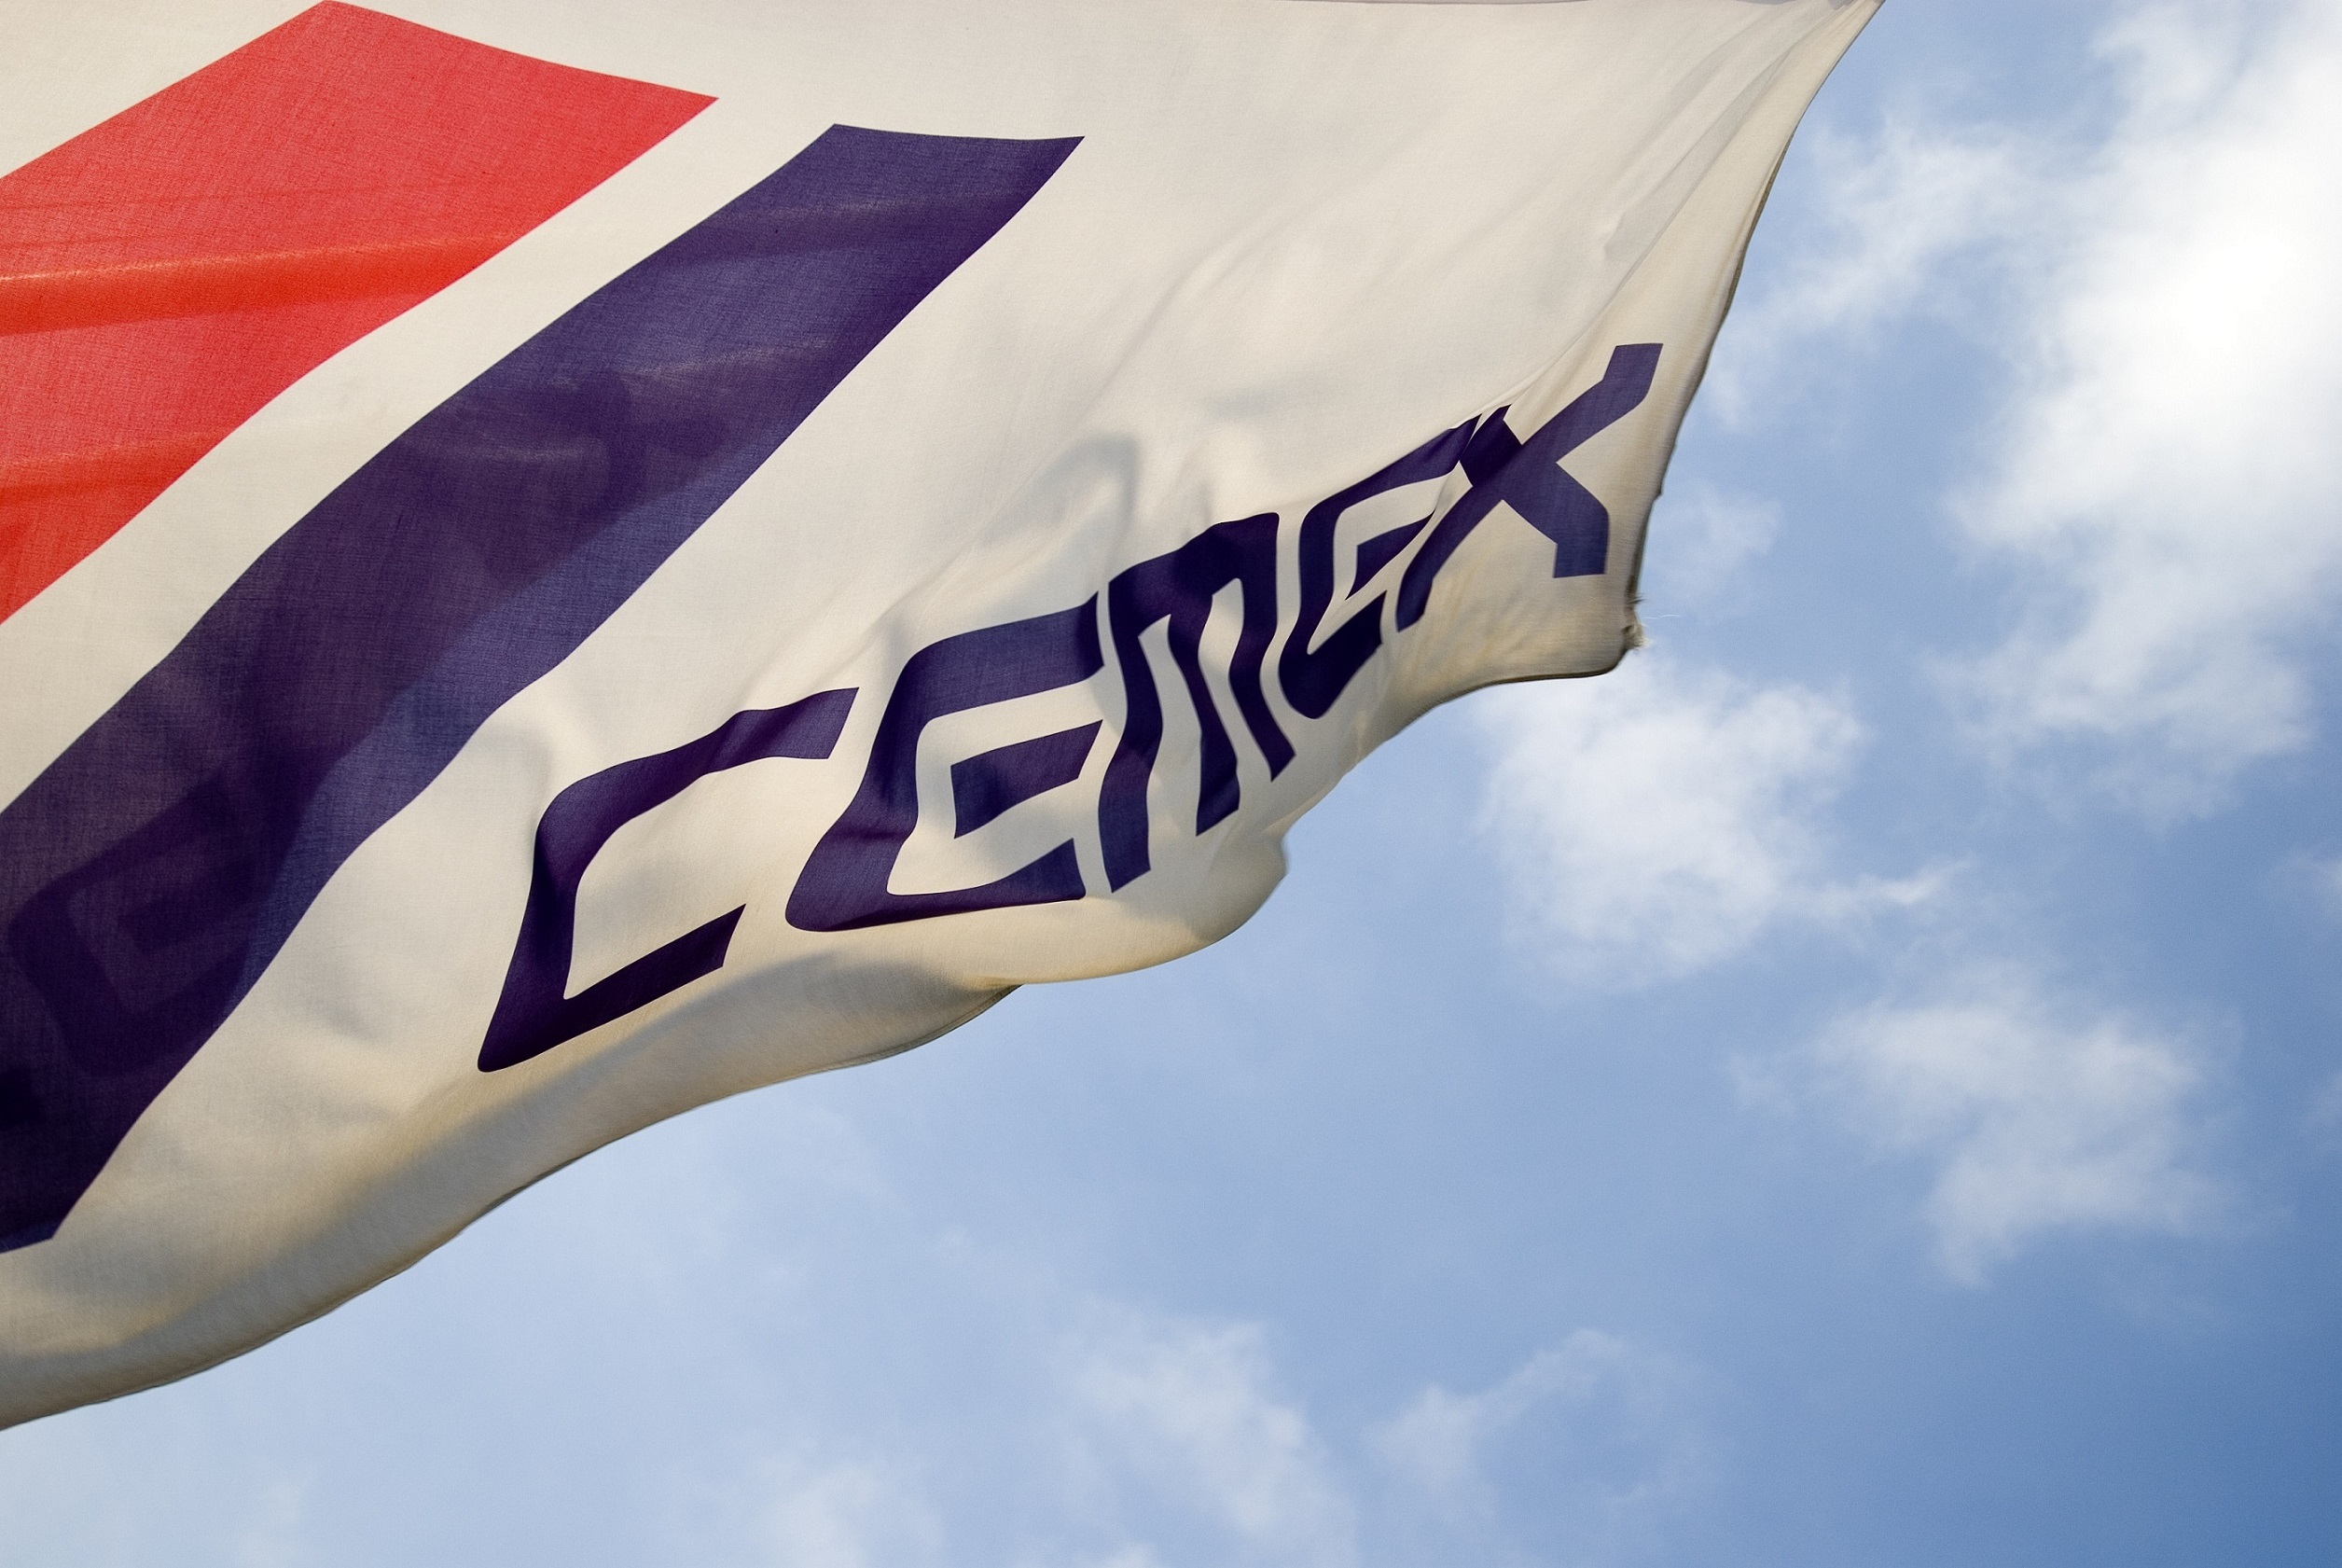  CEMEX says its involvement in LEILAC 2 is part of its efforts to deliver net-zero CO2 concrete by 2050